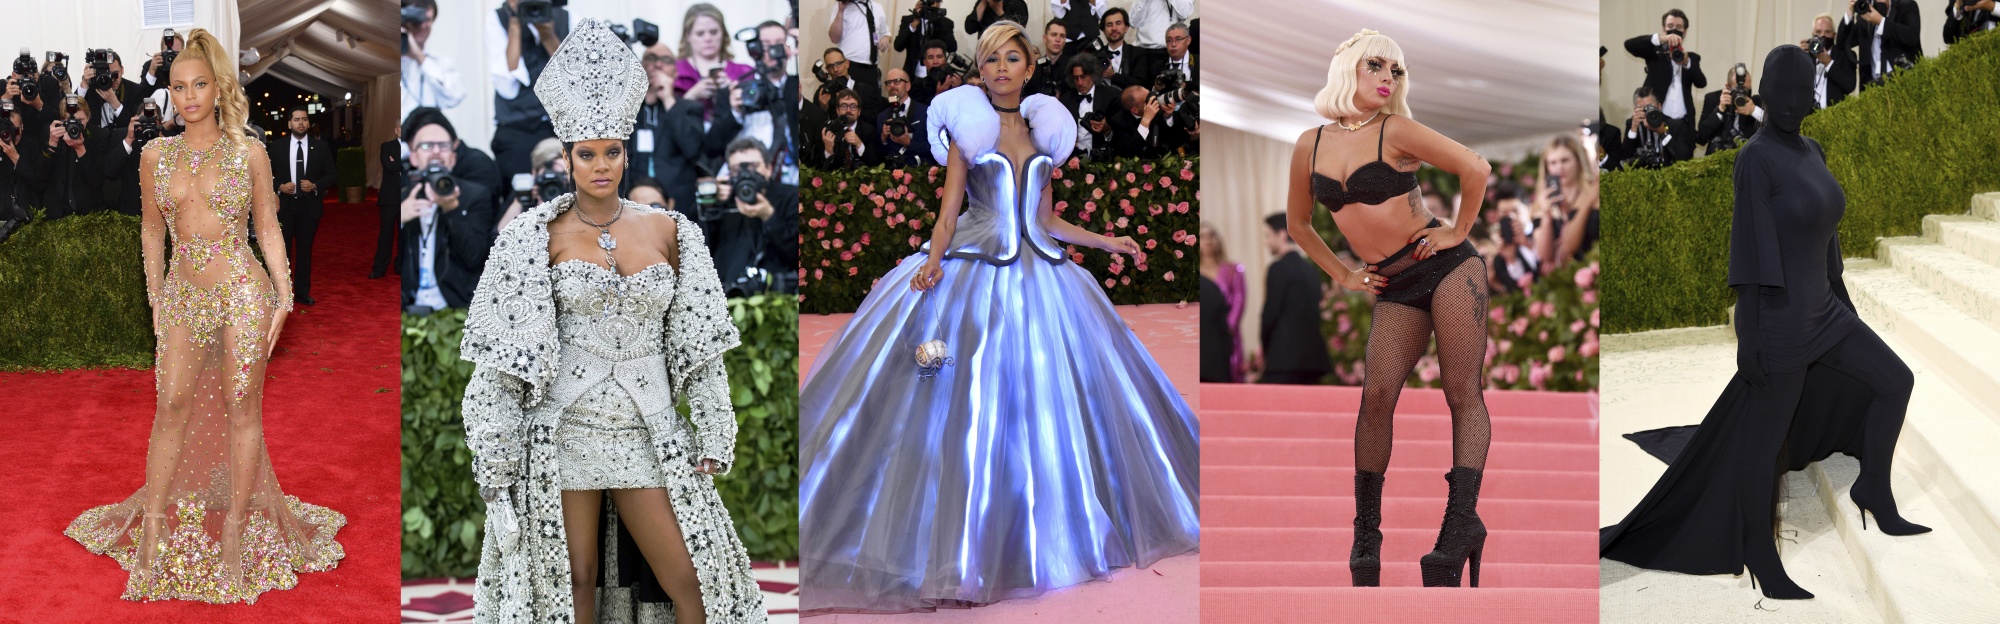 How Instagram Users Scored Met Gala 2021 Outfits - EXCLUSIVE DATA